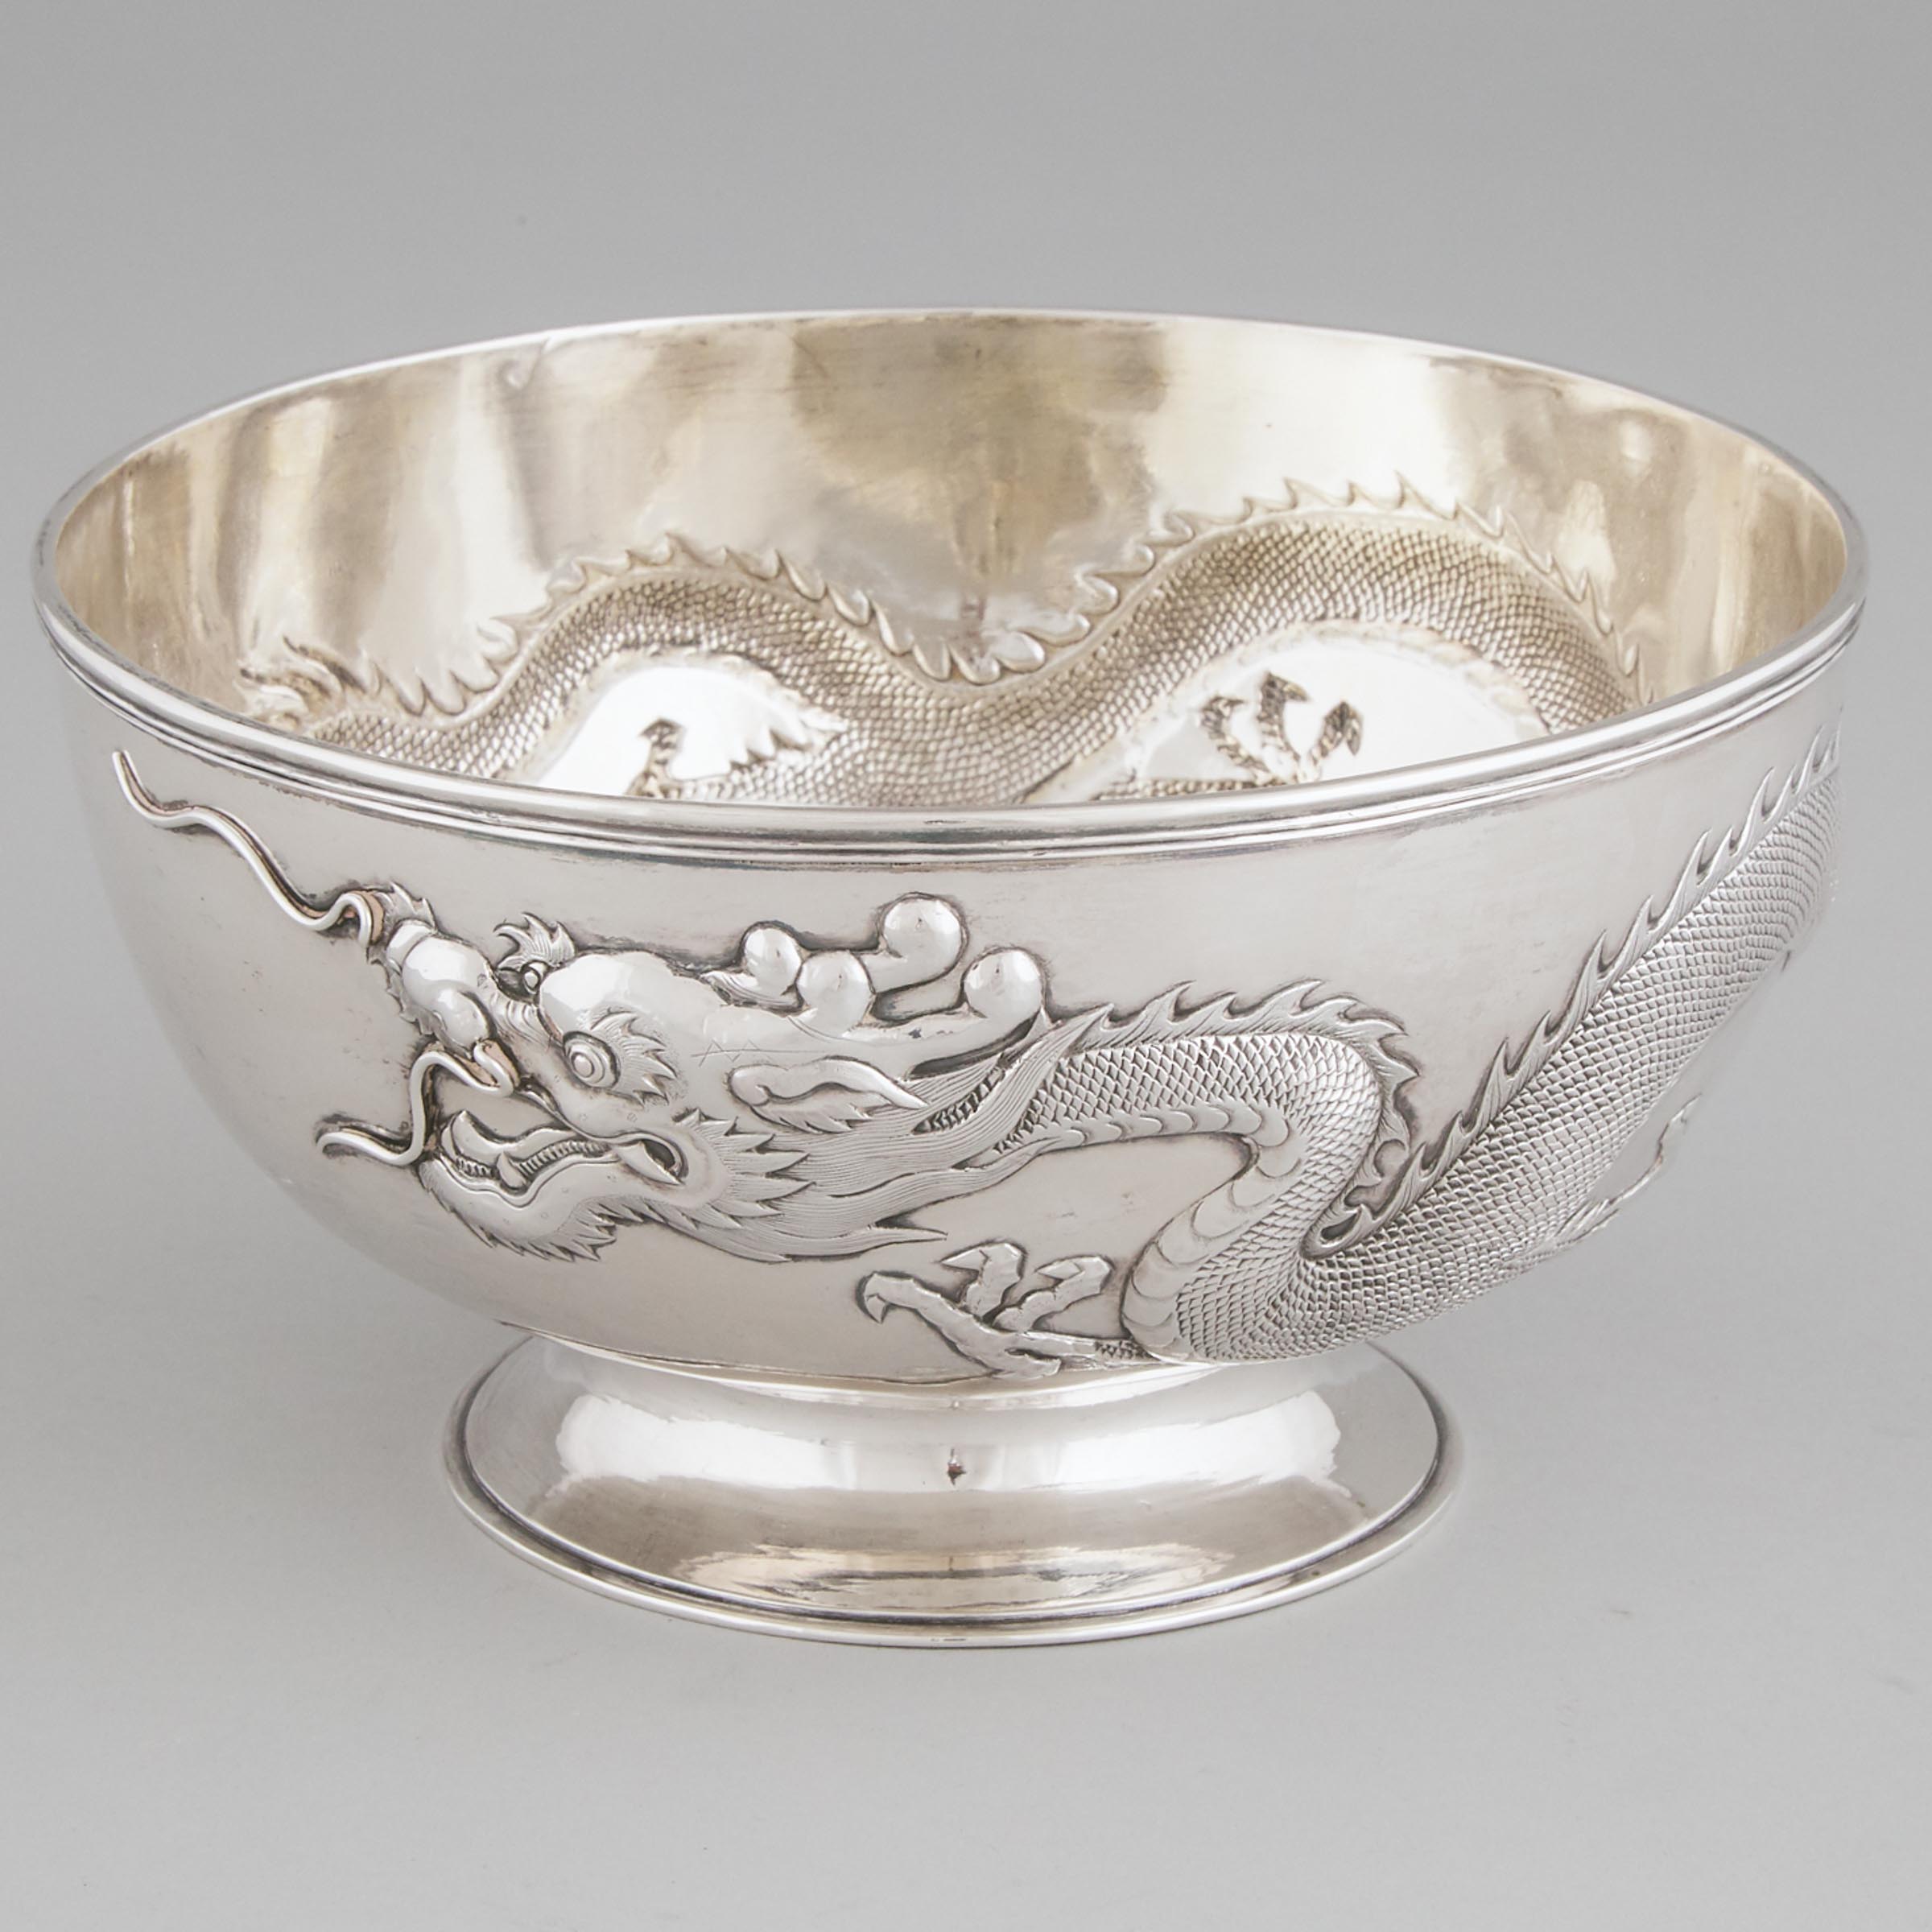 Chinese Export Silver Footed Bowl,